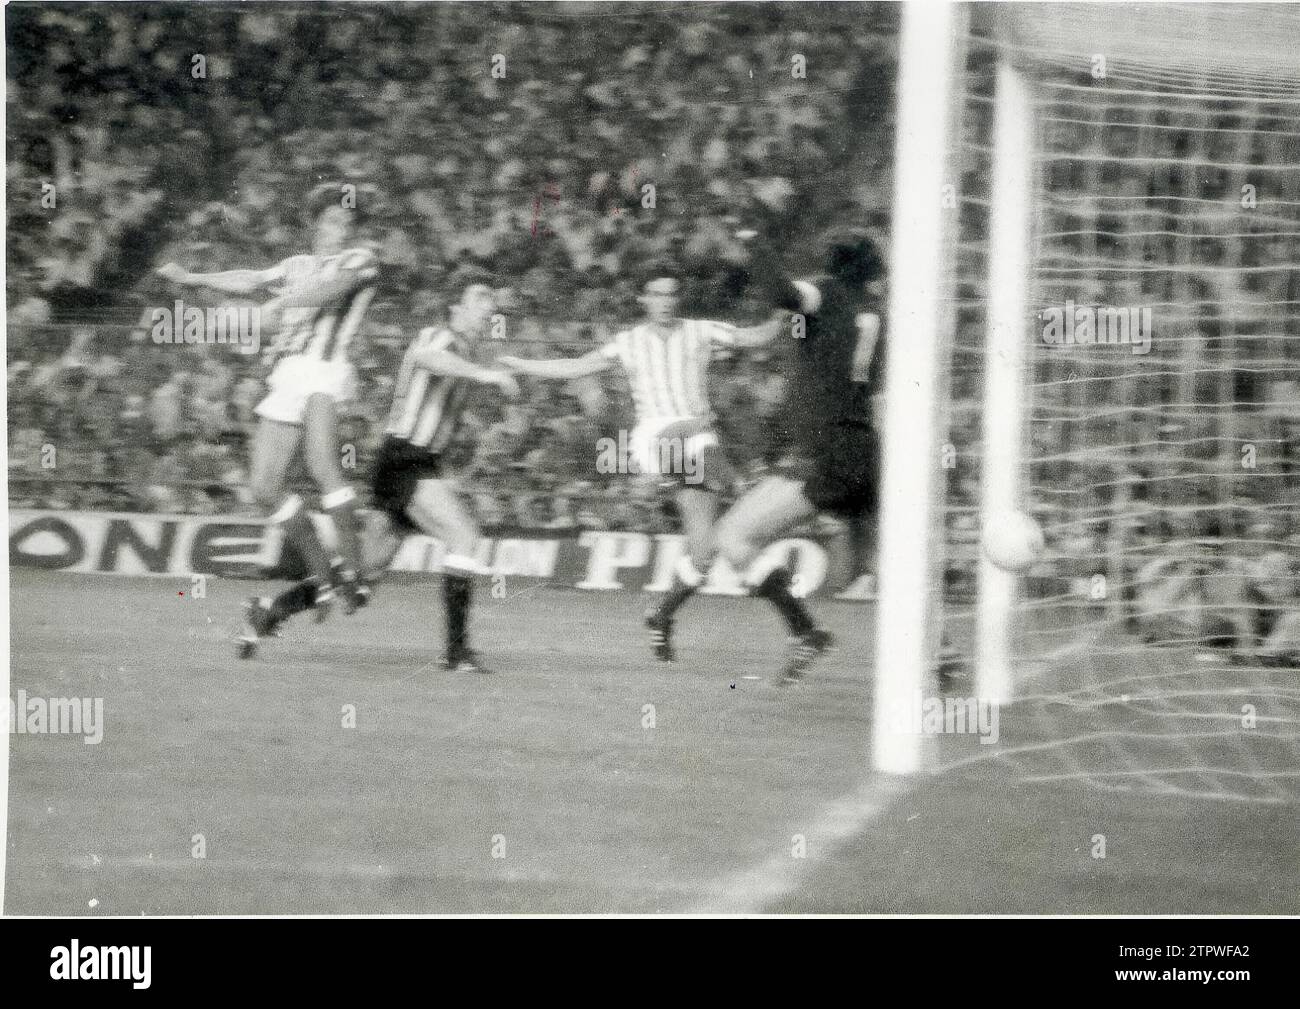 1977 Cup, Betis midfielder Javier López scores Betis's second goal against Iribar in the final of the King's Cup of the 1976-77 season, played at the Vicente Calderón stadium between the Verdiblanco team and Athletic Bilbao on the 25th of June 1977. The Match, Including Extra Time, Ended with a 2-2 tie, so it was necessary to decide the champion in the Penalty Shootouts. (photo Ruesga Bono). Credit: Album / Archivo ABC / Ruesga Stock Photo